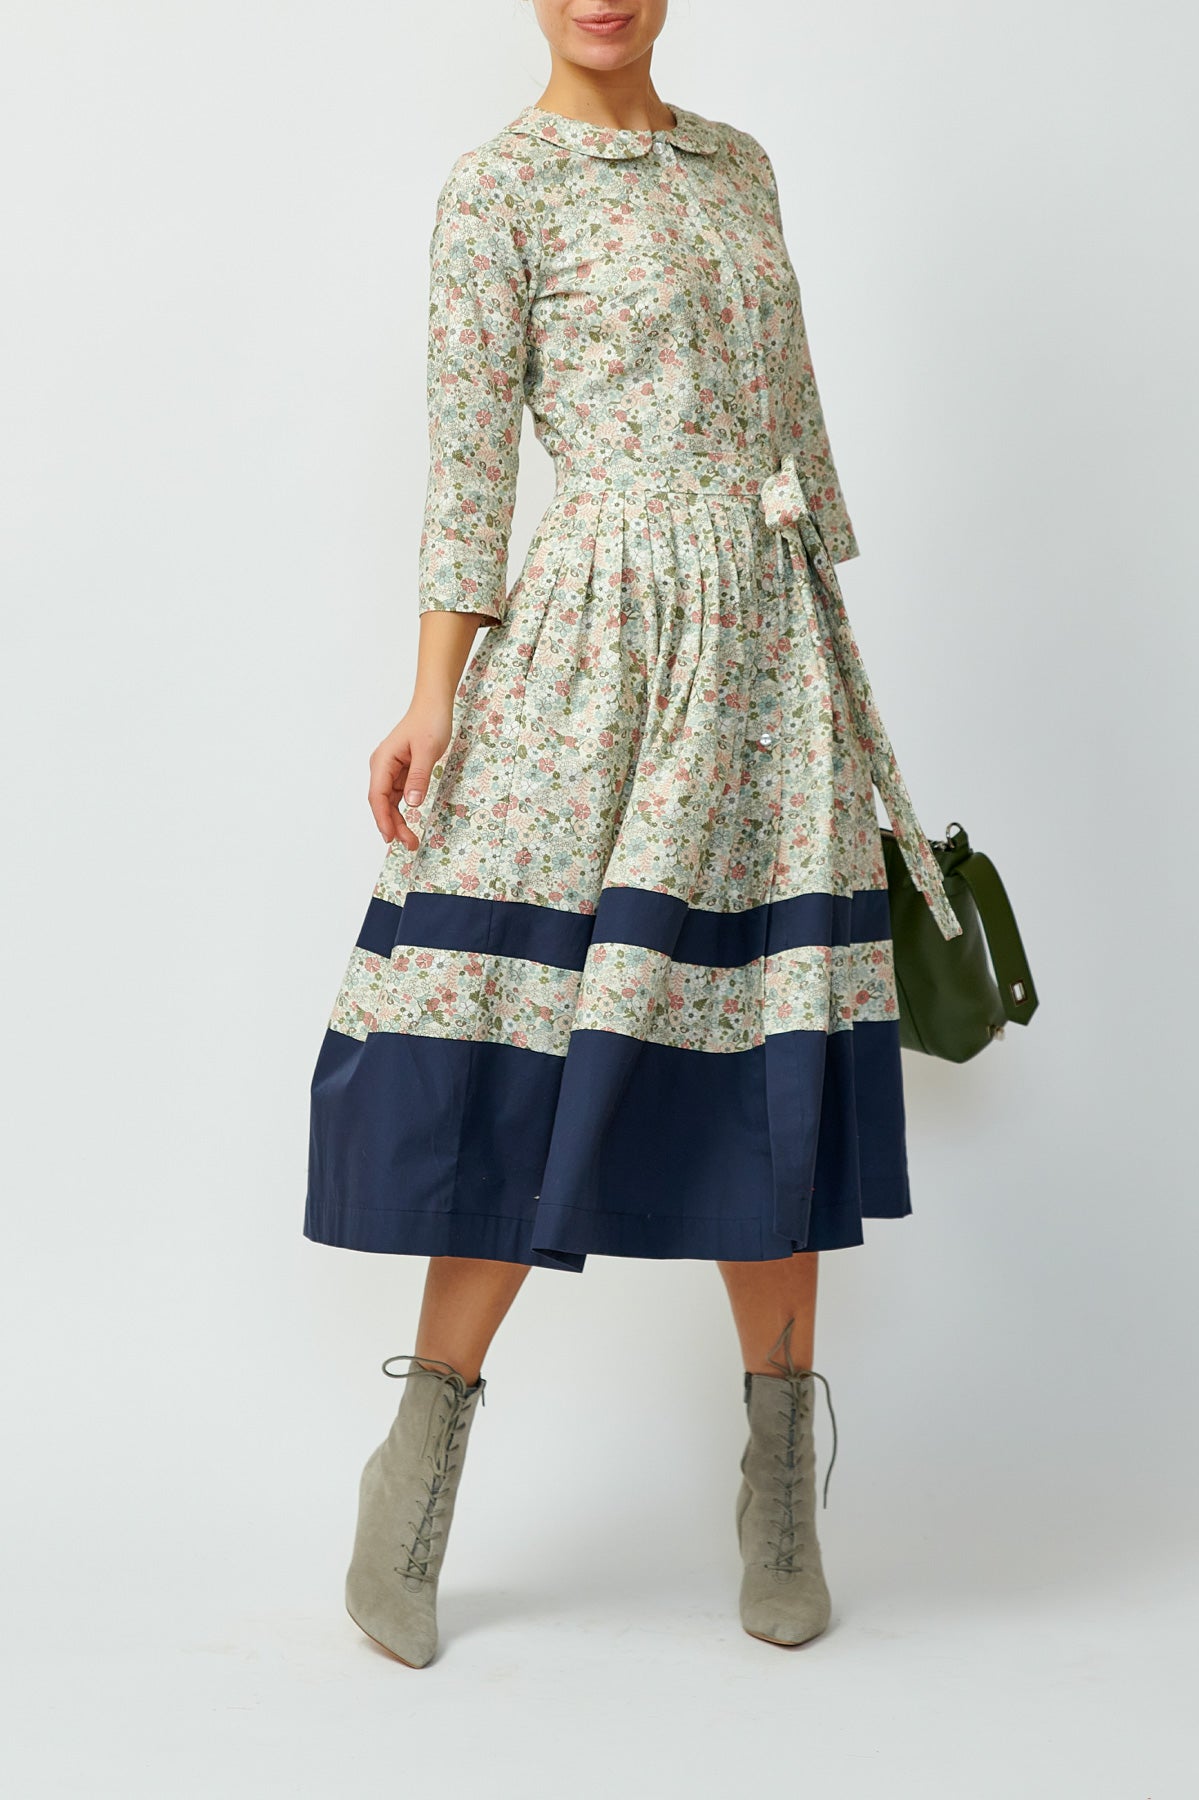 Shirt dress in small flowers and with a gray border